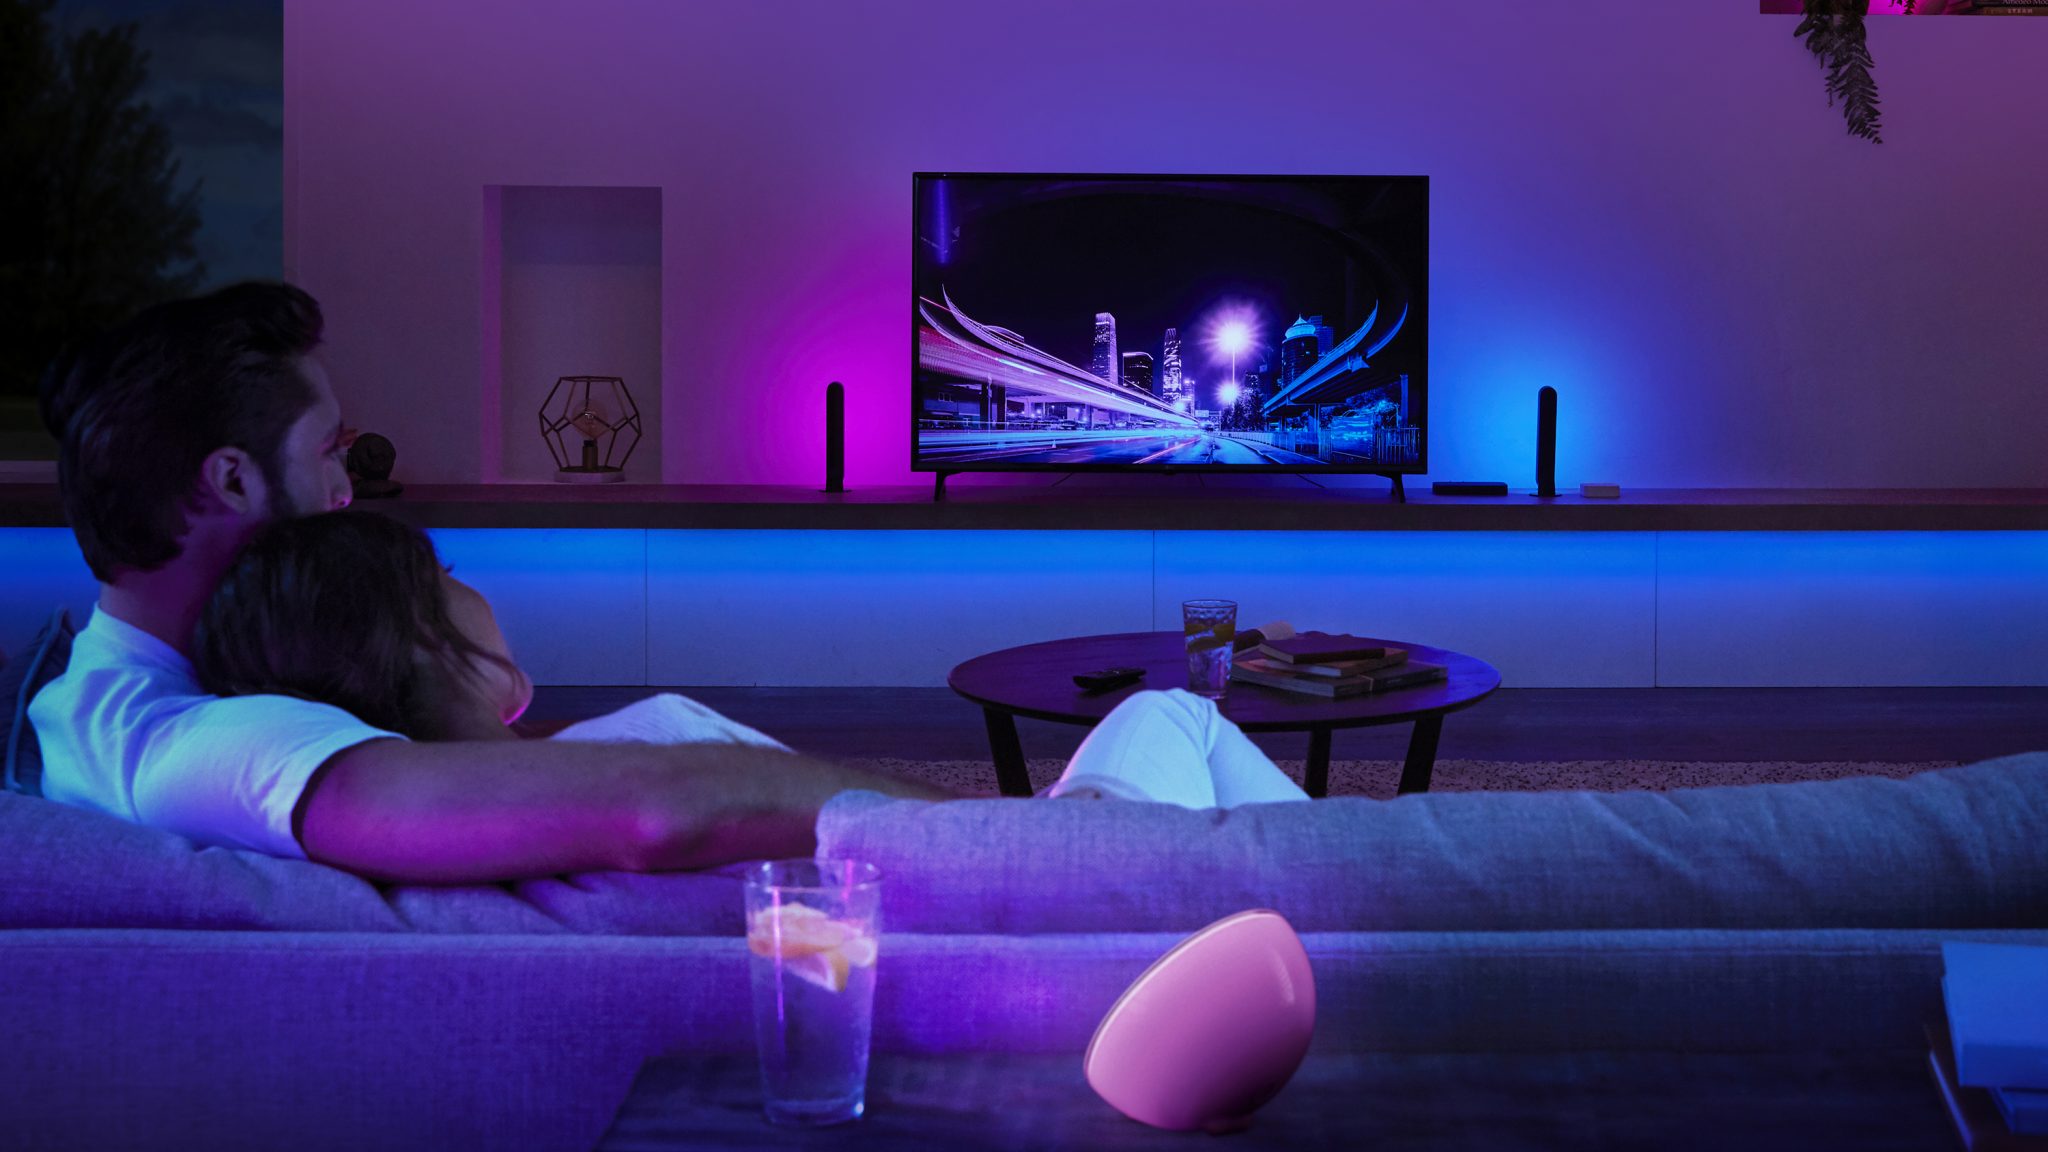 How to Set up a Philips Hue Sync Box with a TV